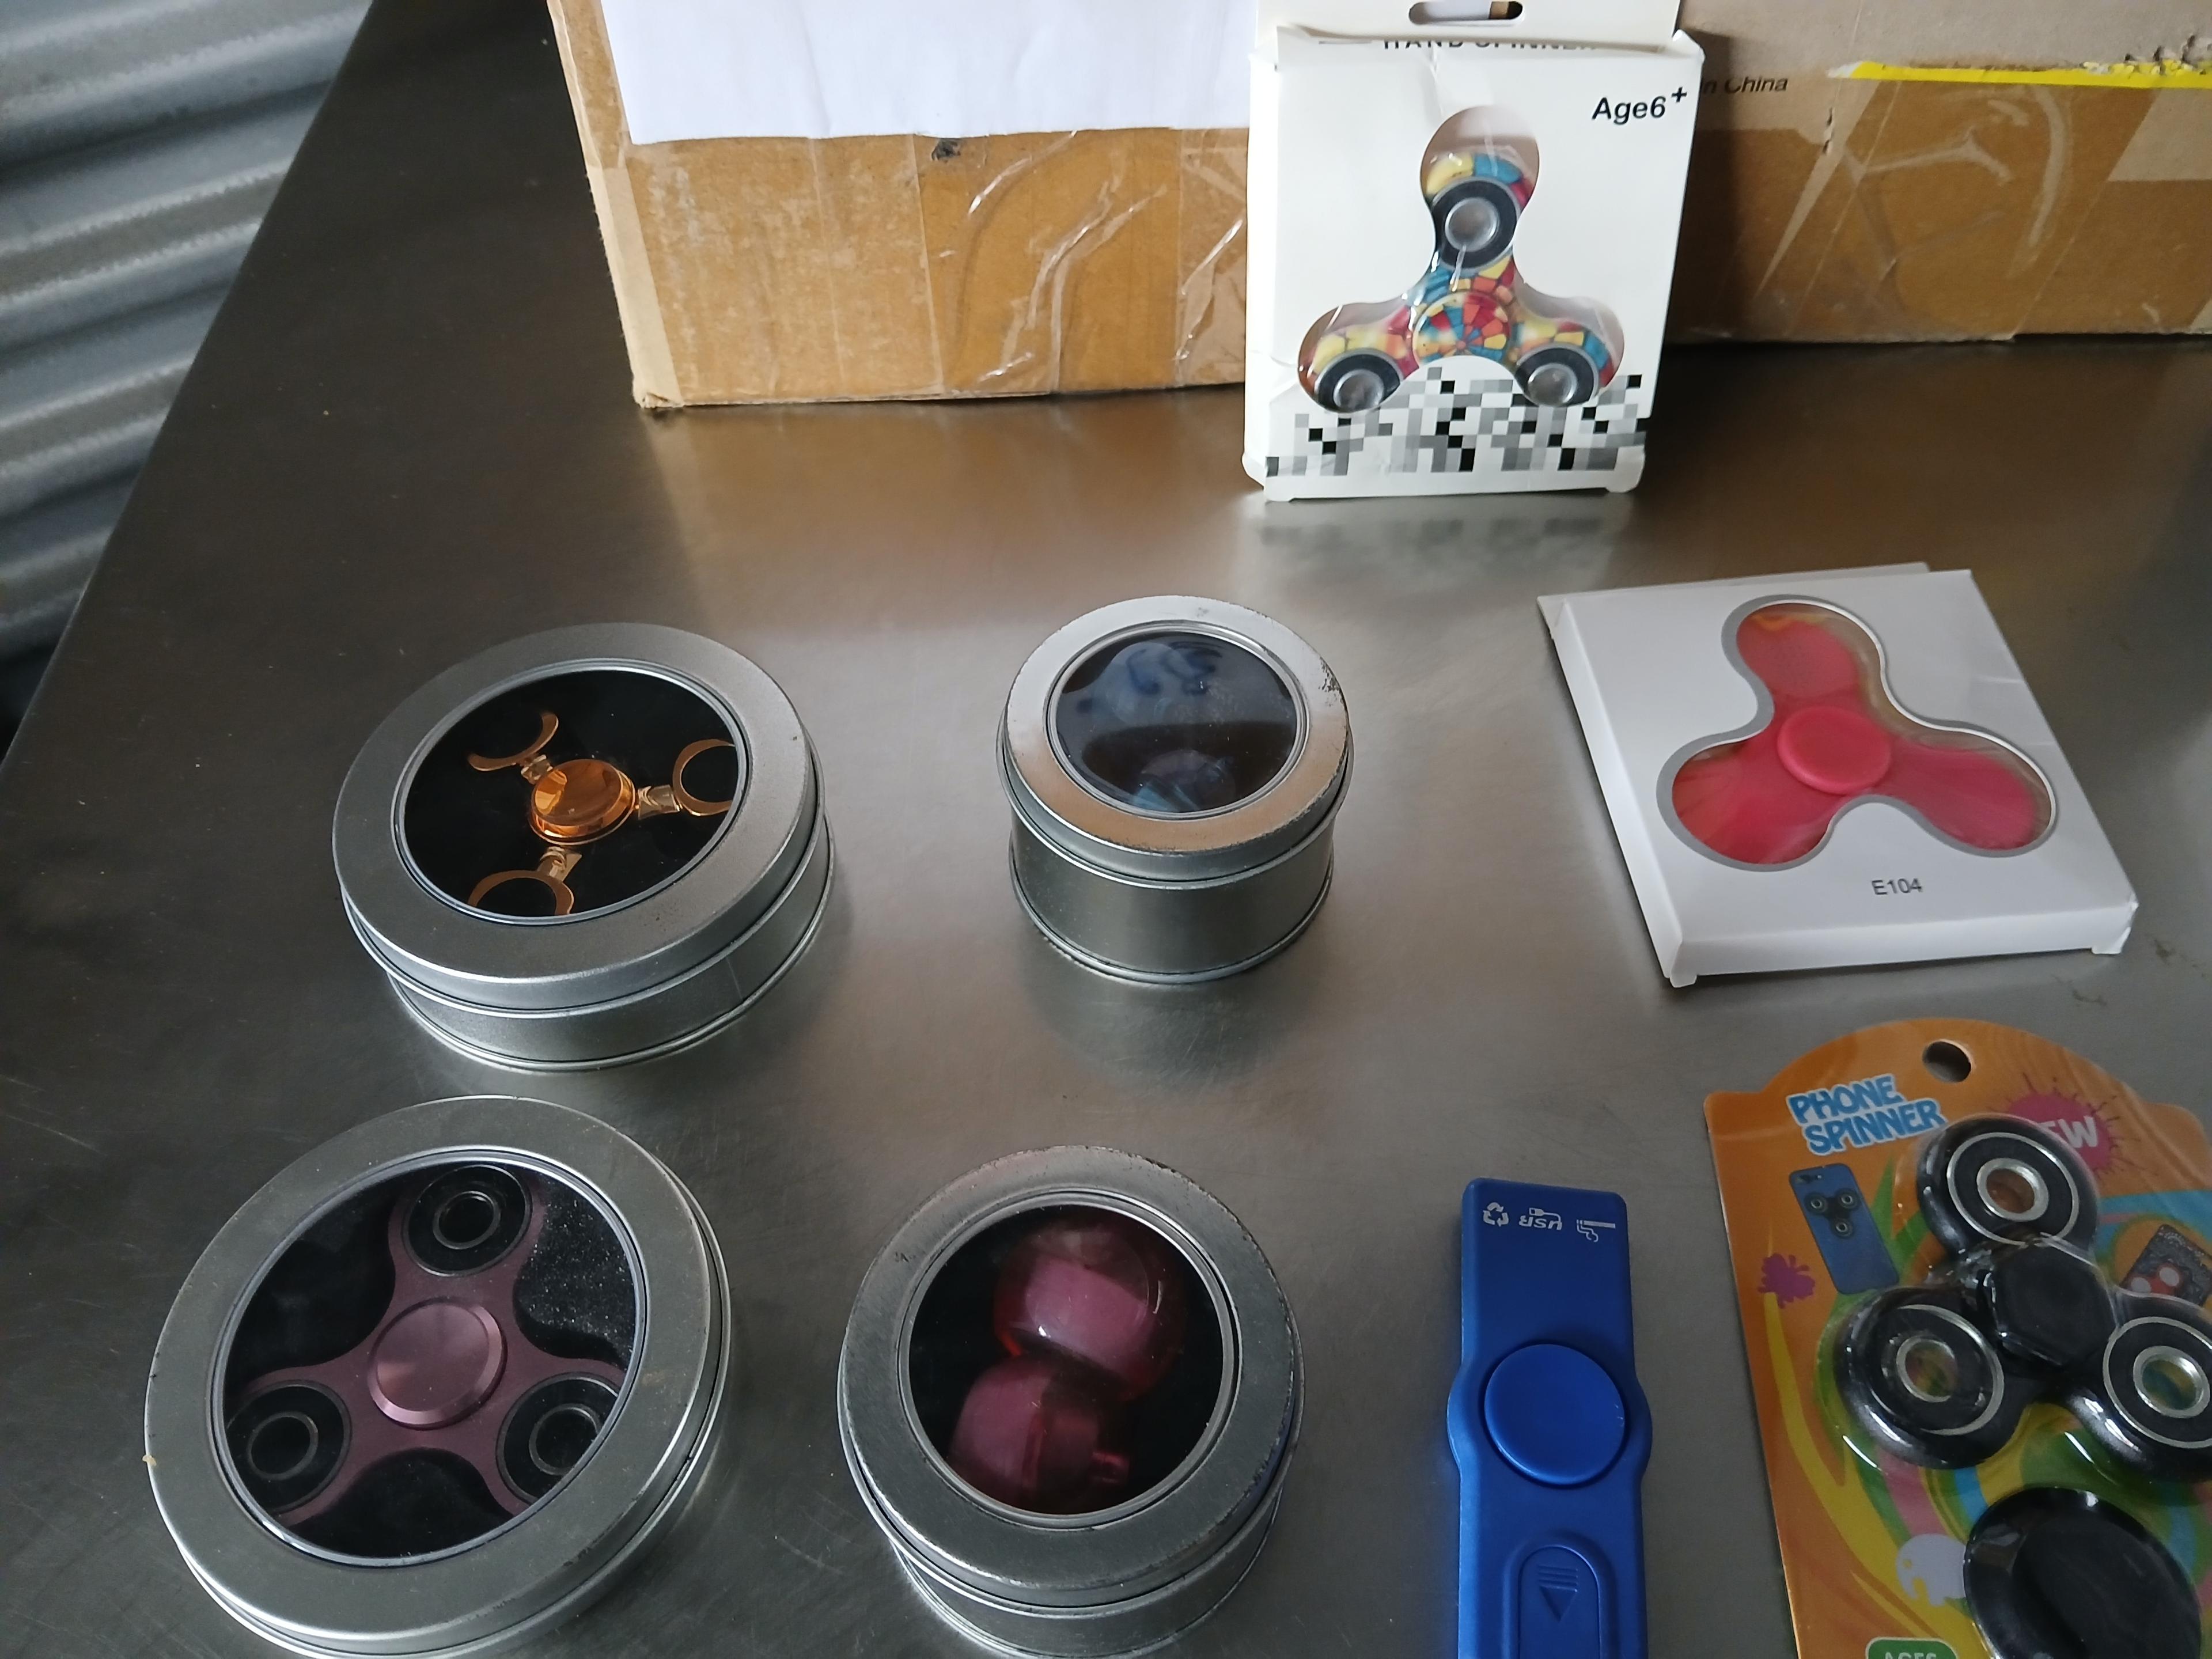 LARGE LOT Fidget Spinners / Fidget Sticks & Fidget Cubes BRAND NEW IN THE BOX - They are all individ